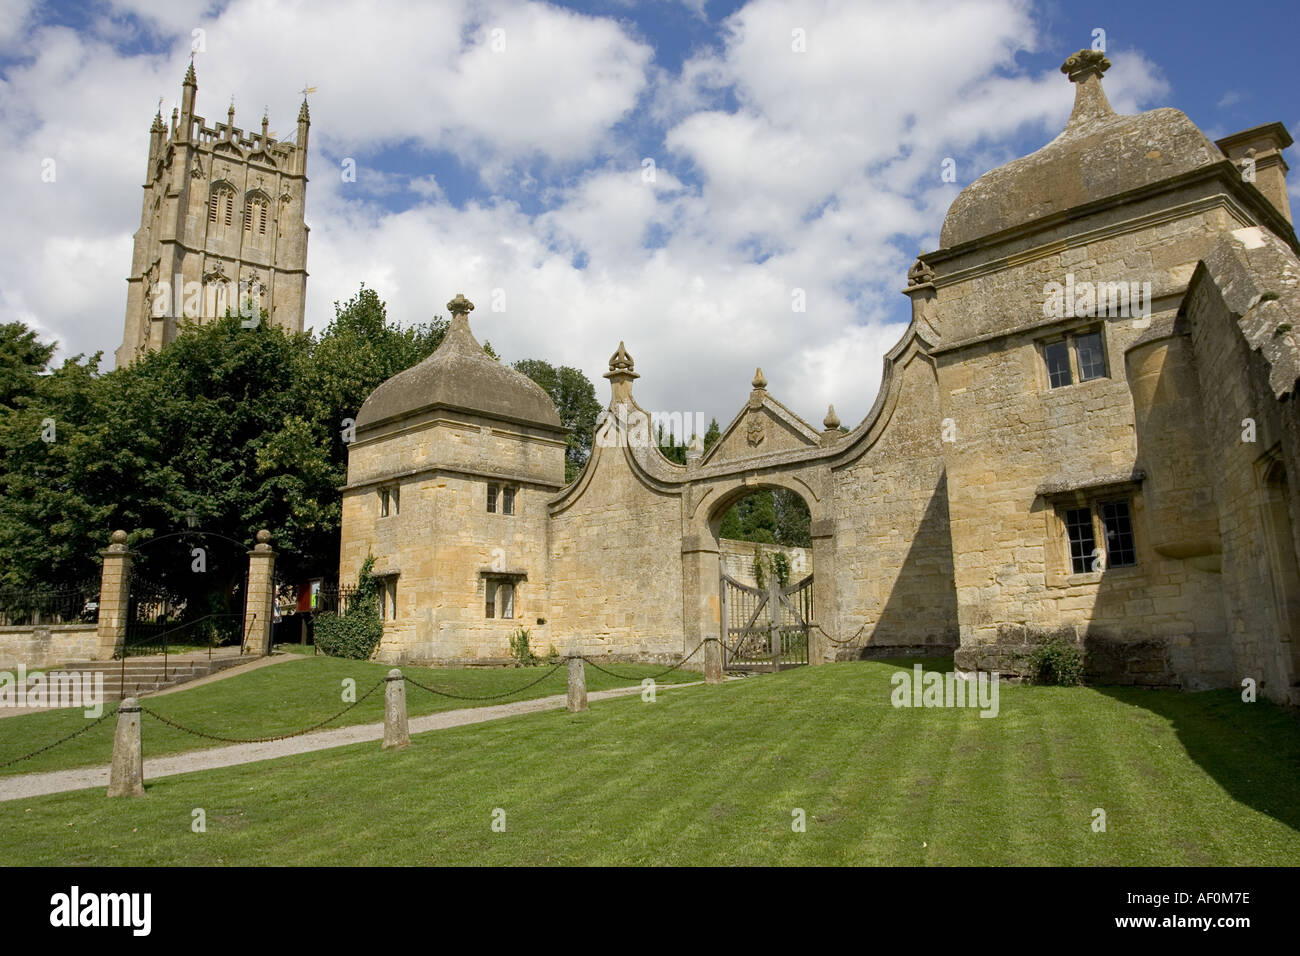 St James Church Chipping Campden Cotswolds Britain Stock Photo